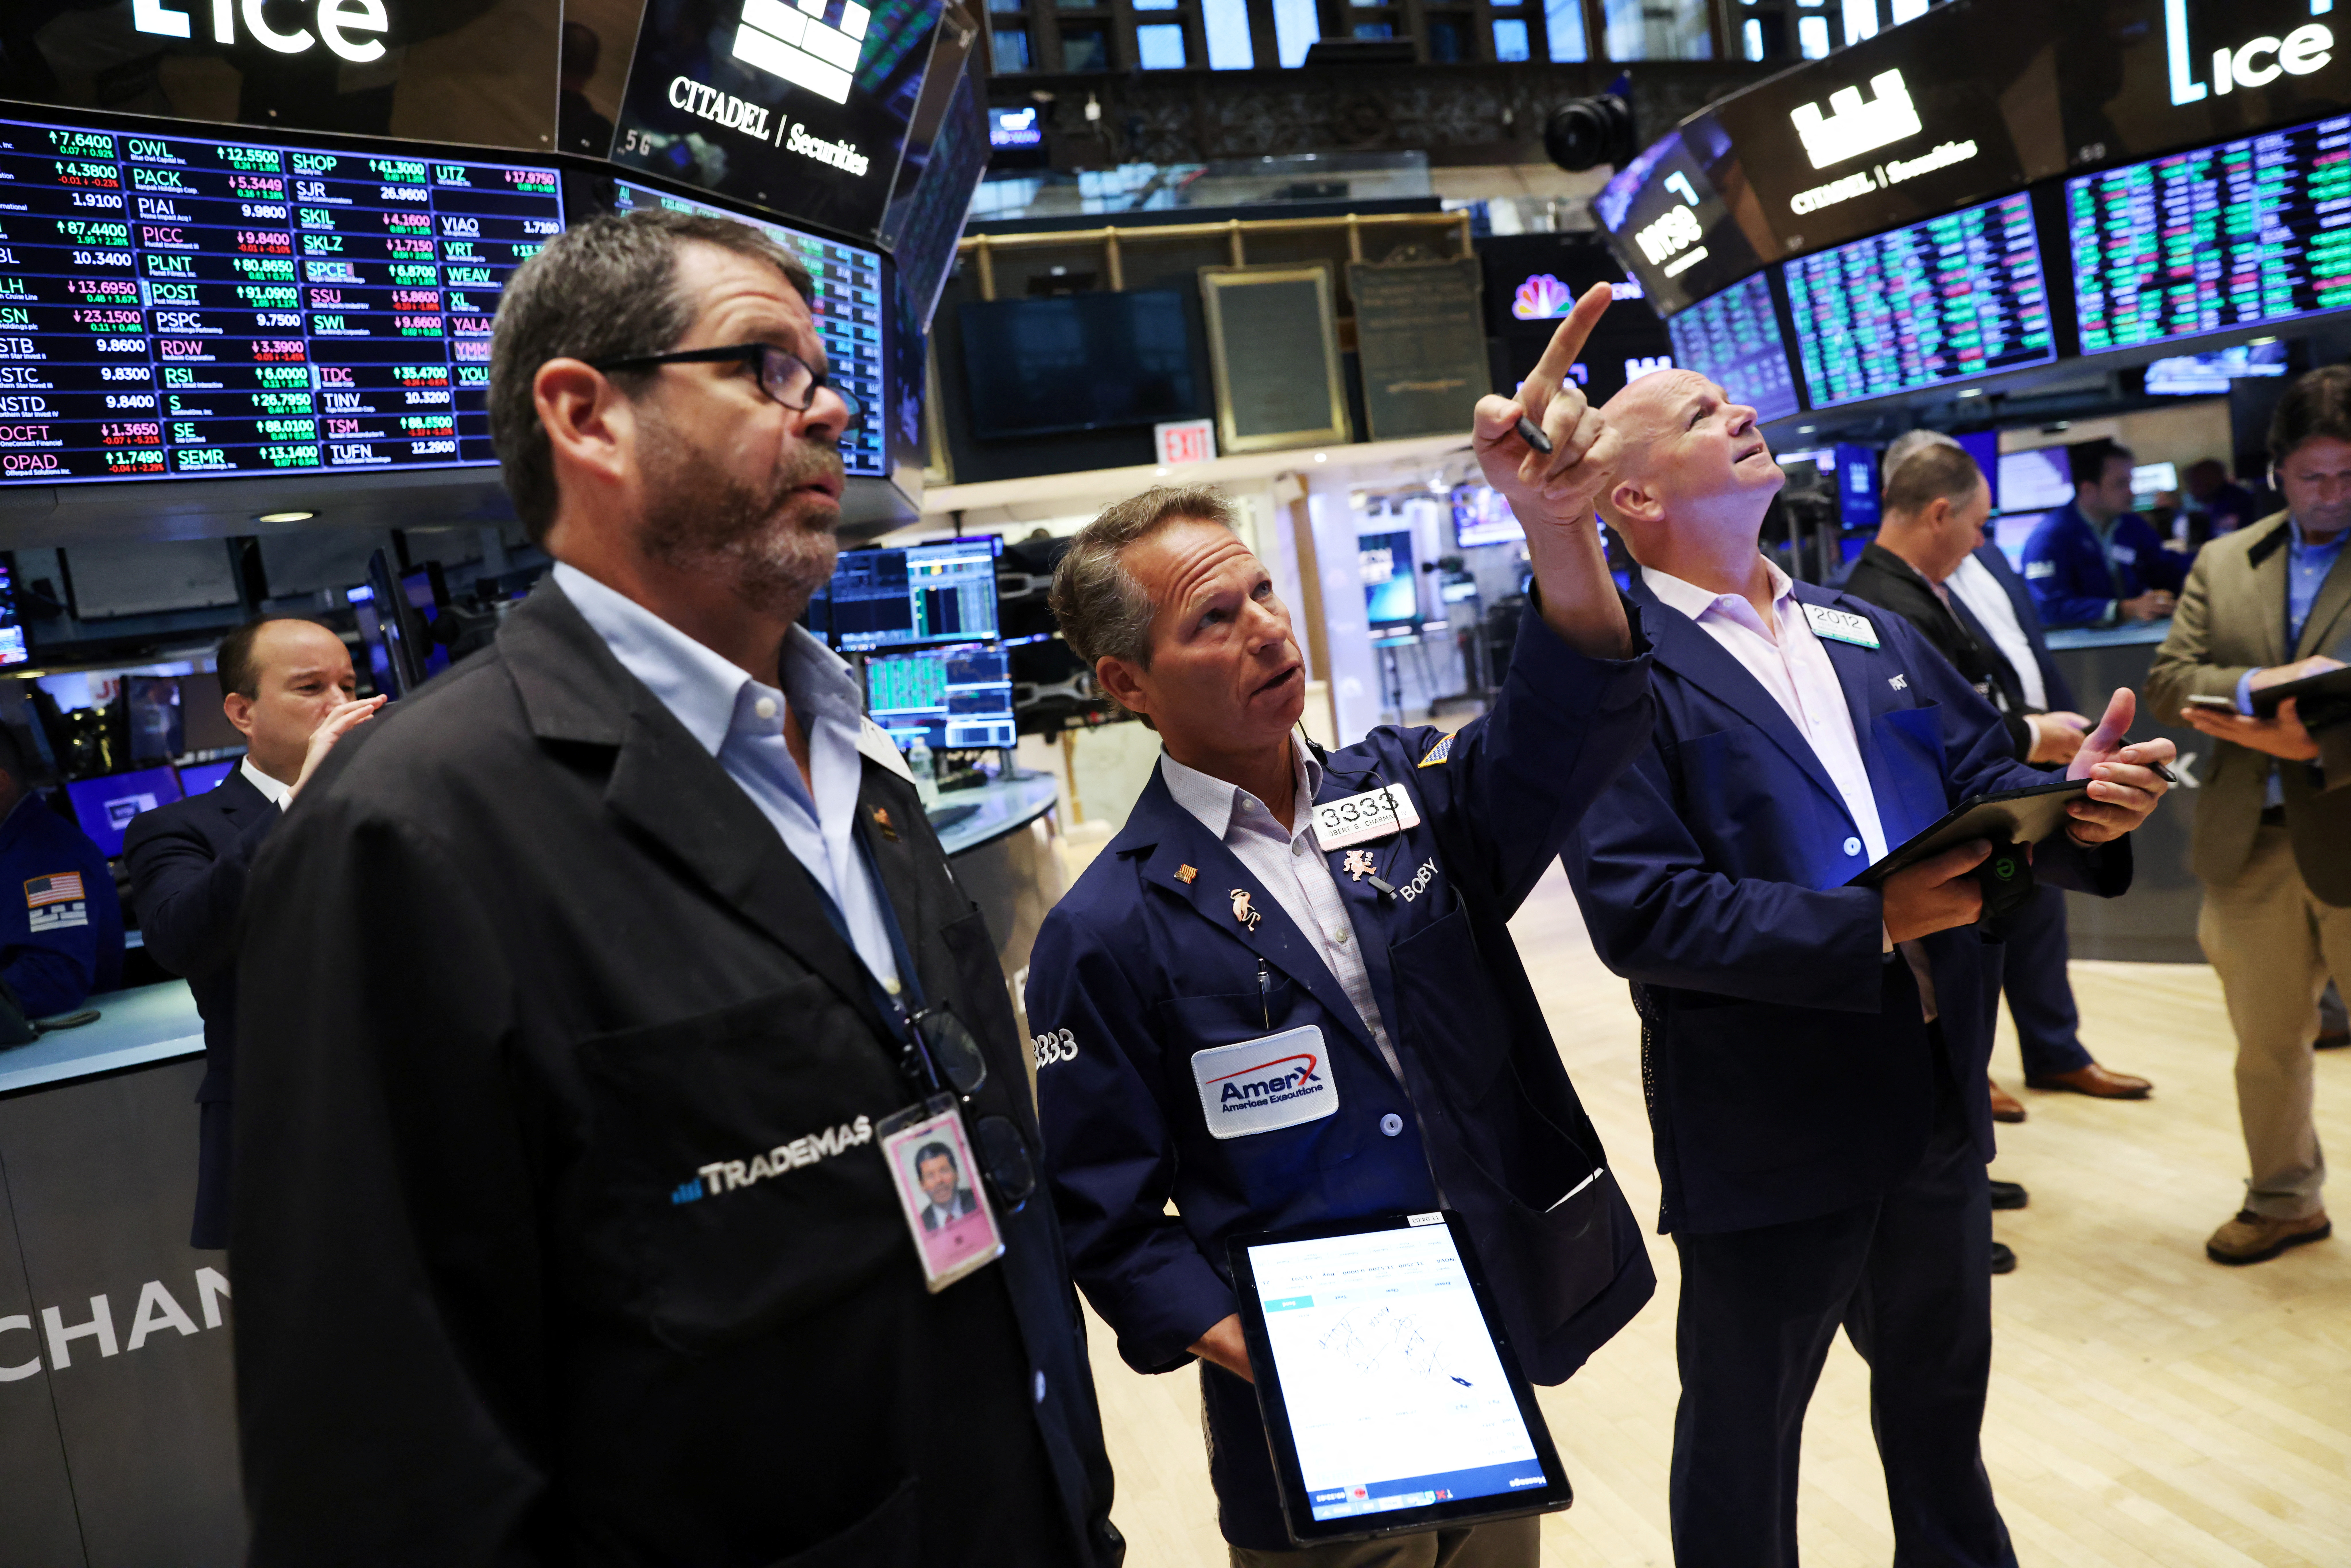 Traders work on the trading floor at the New York Stock Exchange (NYSE) in Manhattan, New York City, U.S., August 8, 2022. REUTERS/Andrew Kelly